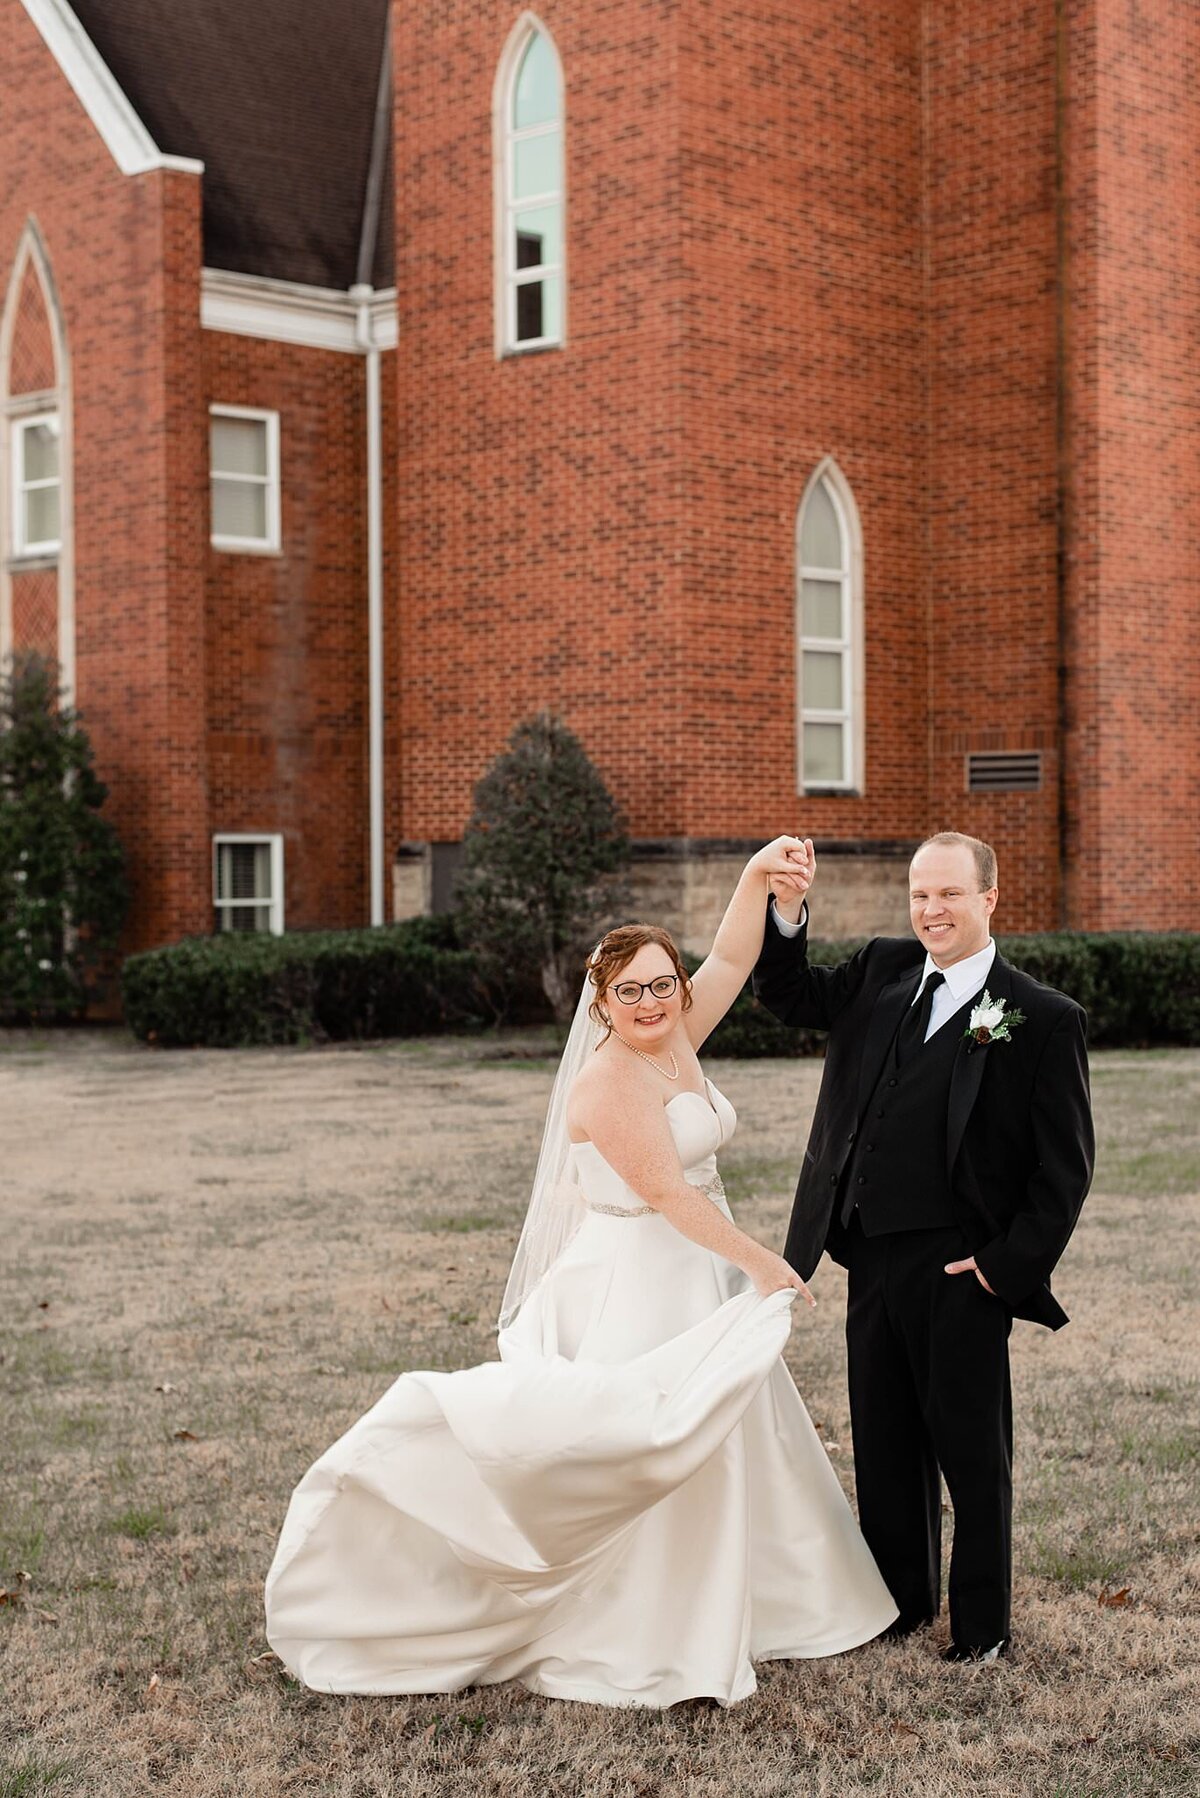 The bride and groom stand in front of a red brick church. The groom is wearing a black suit with a white shirt and black tie. He has one hand in his pocket and the other raised up to twirl the bride. The bride, holding the long train of her white satin dress, twirls back and forth. The bride is wearing a dress with a rhinestone belt and a strapless sweetheart neckline.